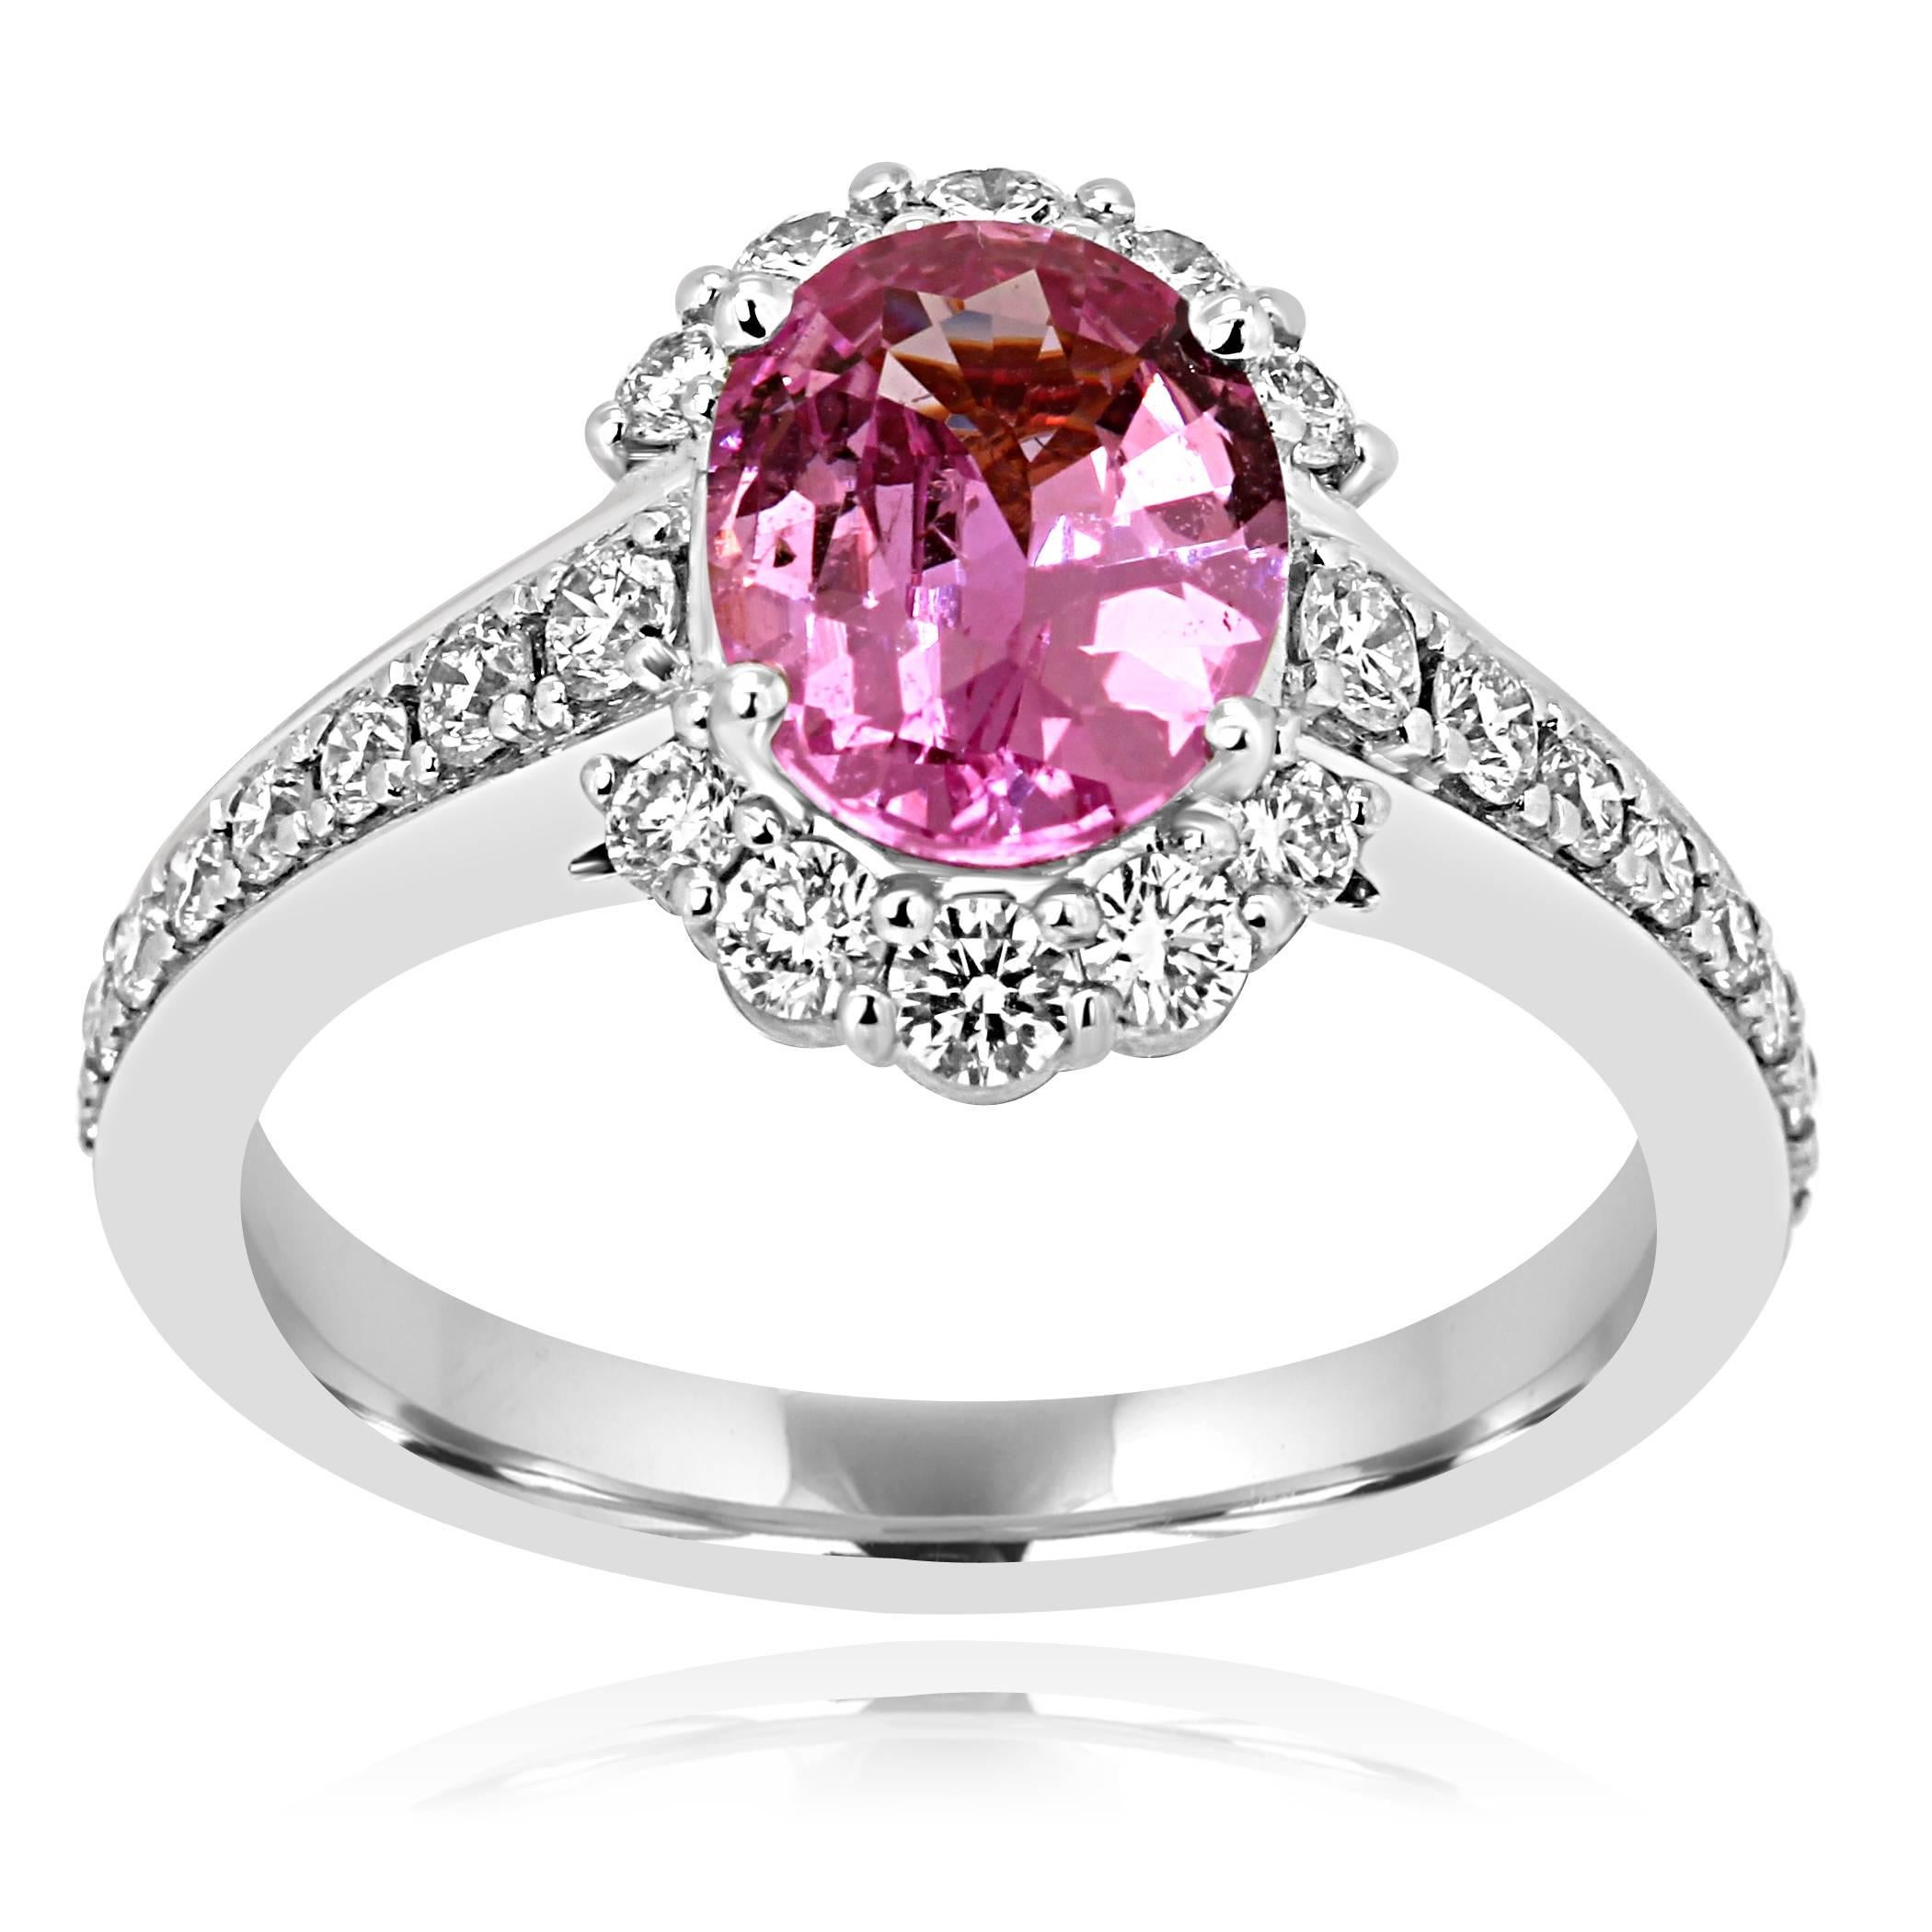 Gorgeous Pink Sapphire Oval 1.92 Carat encircled in a Halo of White Round Diamonds 0.6 Carat in a Stylish 18K White and Rose Gold Bridal Fashion Ring.

Style available in different price ranges. Prices are based on your selection of 4C's Cut, Color,